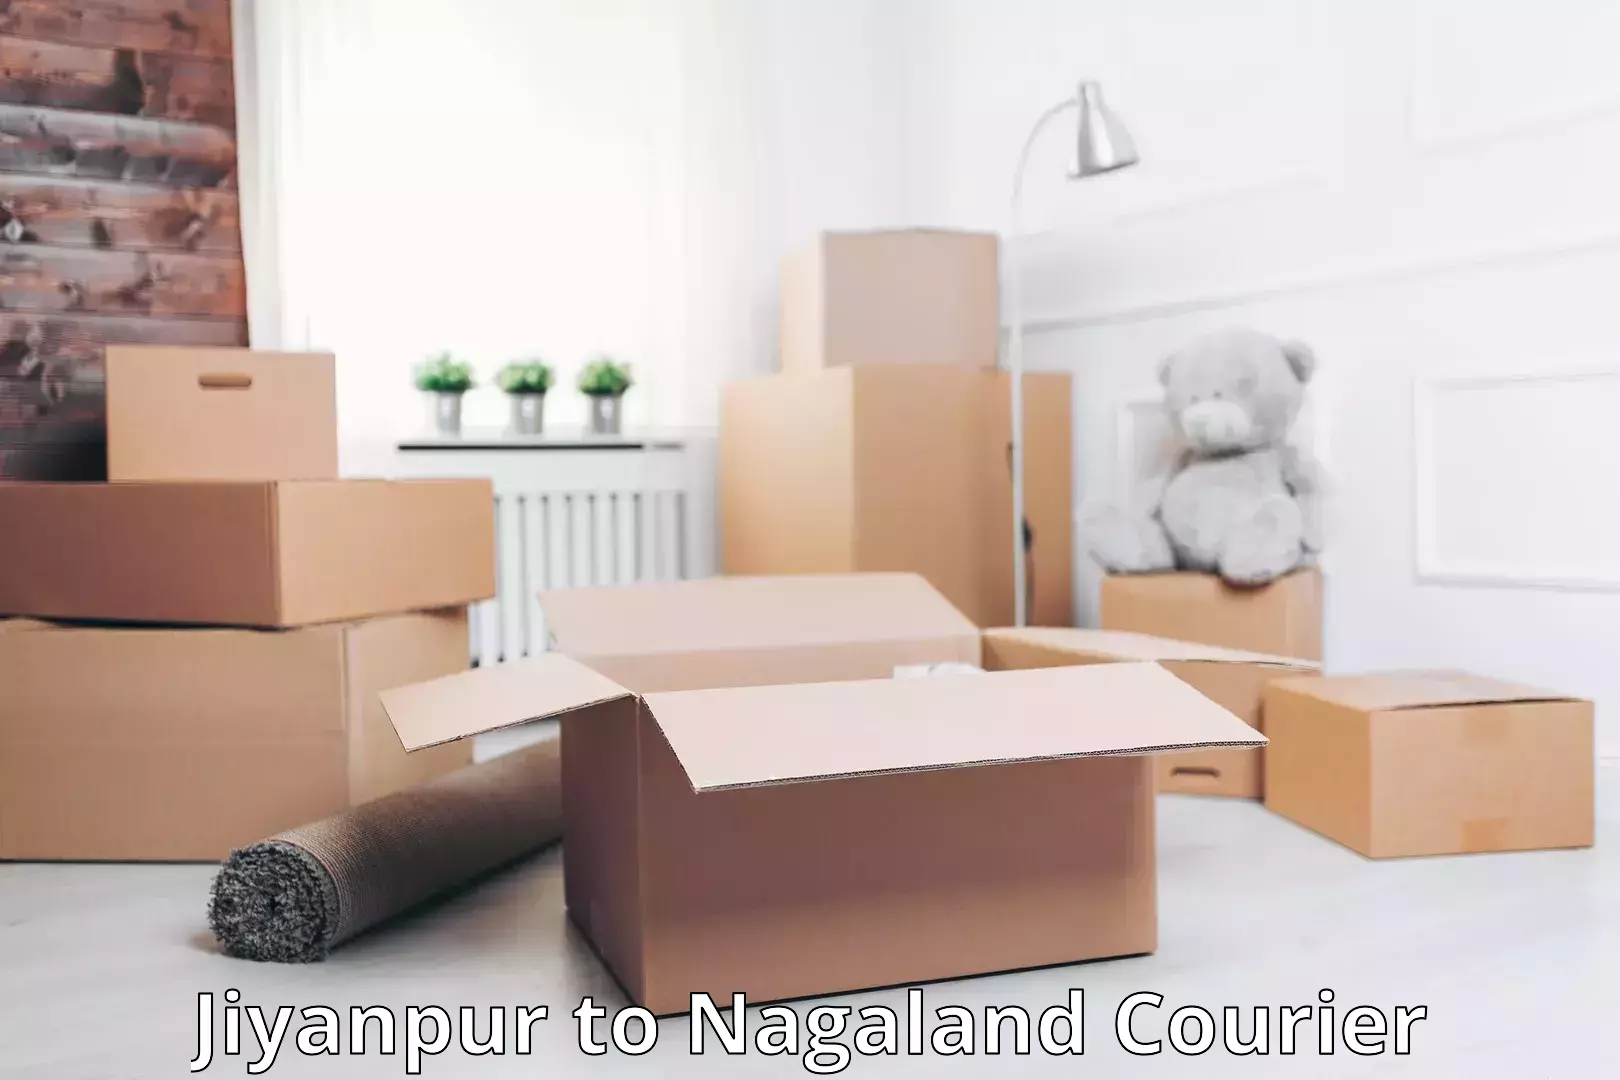 Luggage shipment tracking in Jiyanpur to Nagaland